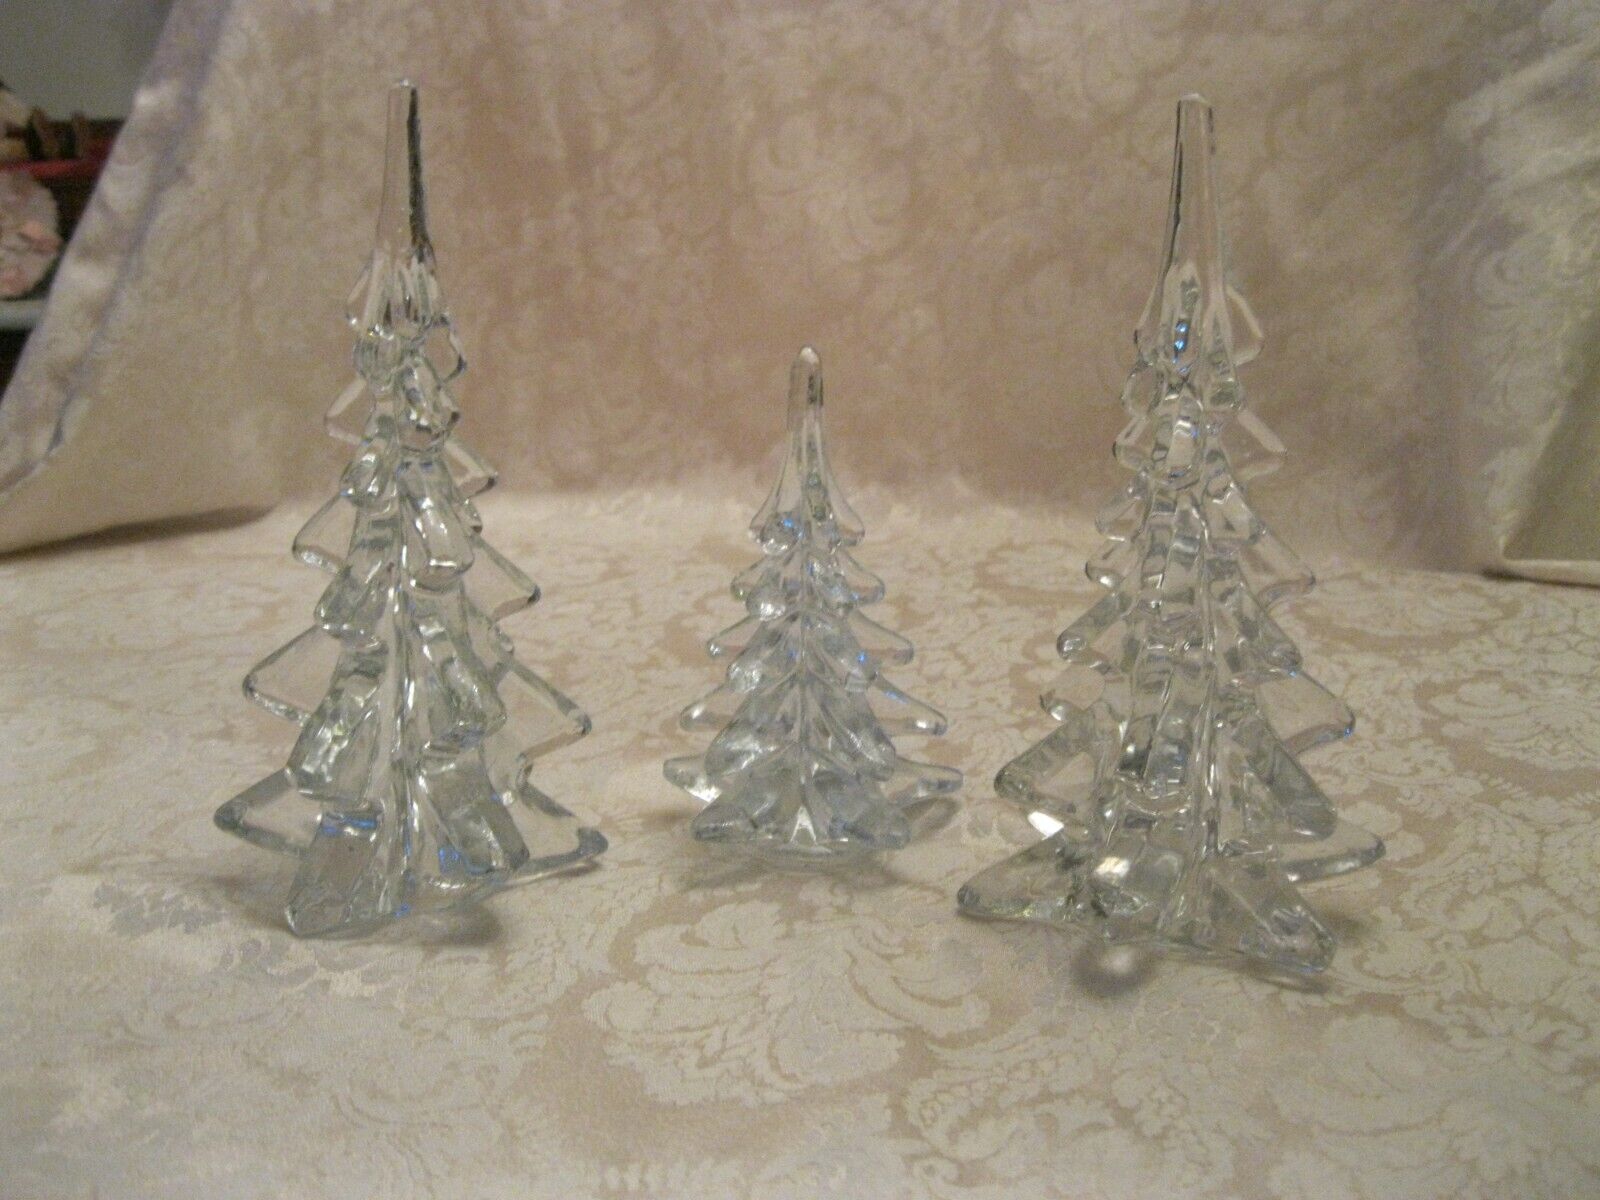 LOT OF 3 VINTAGE CLEAR GLASS CHRISTMAS TREES